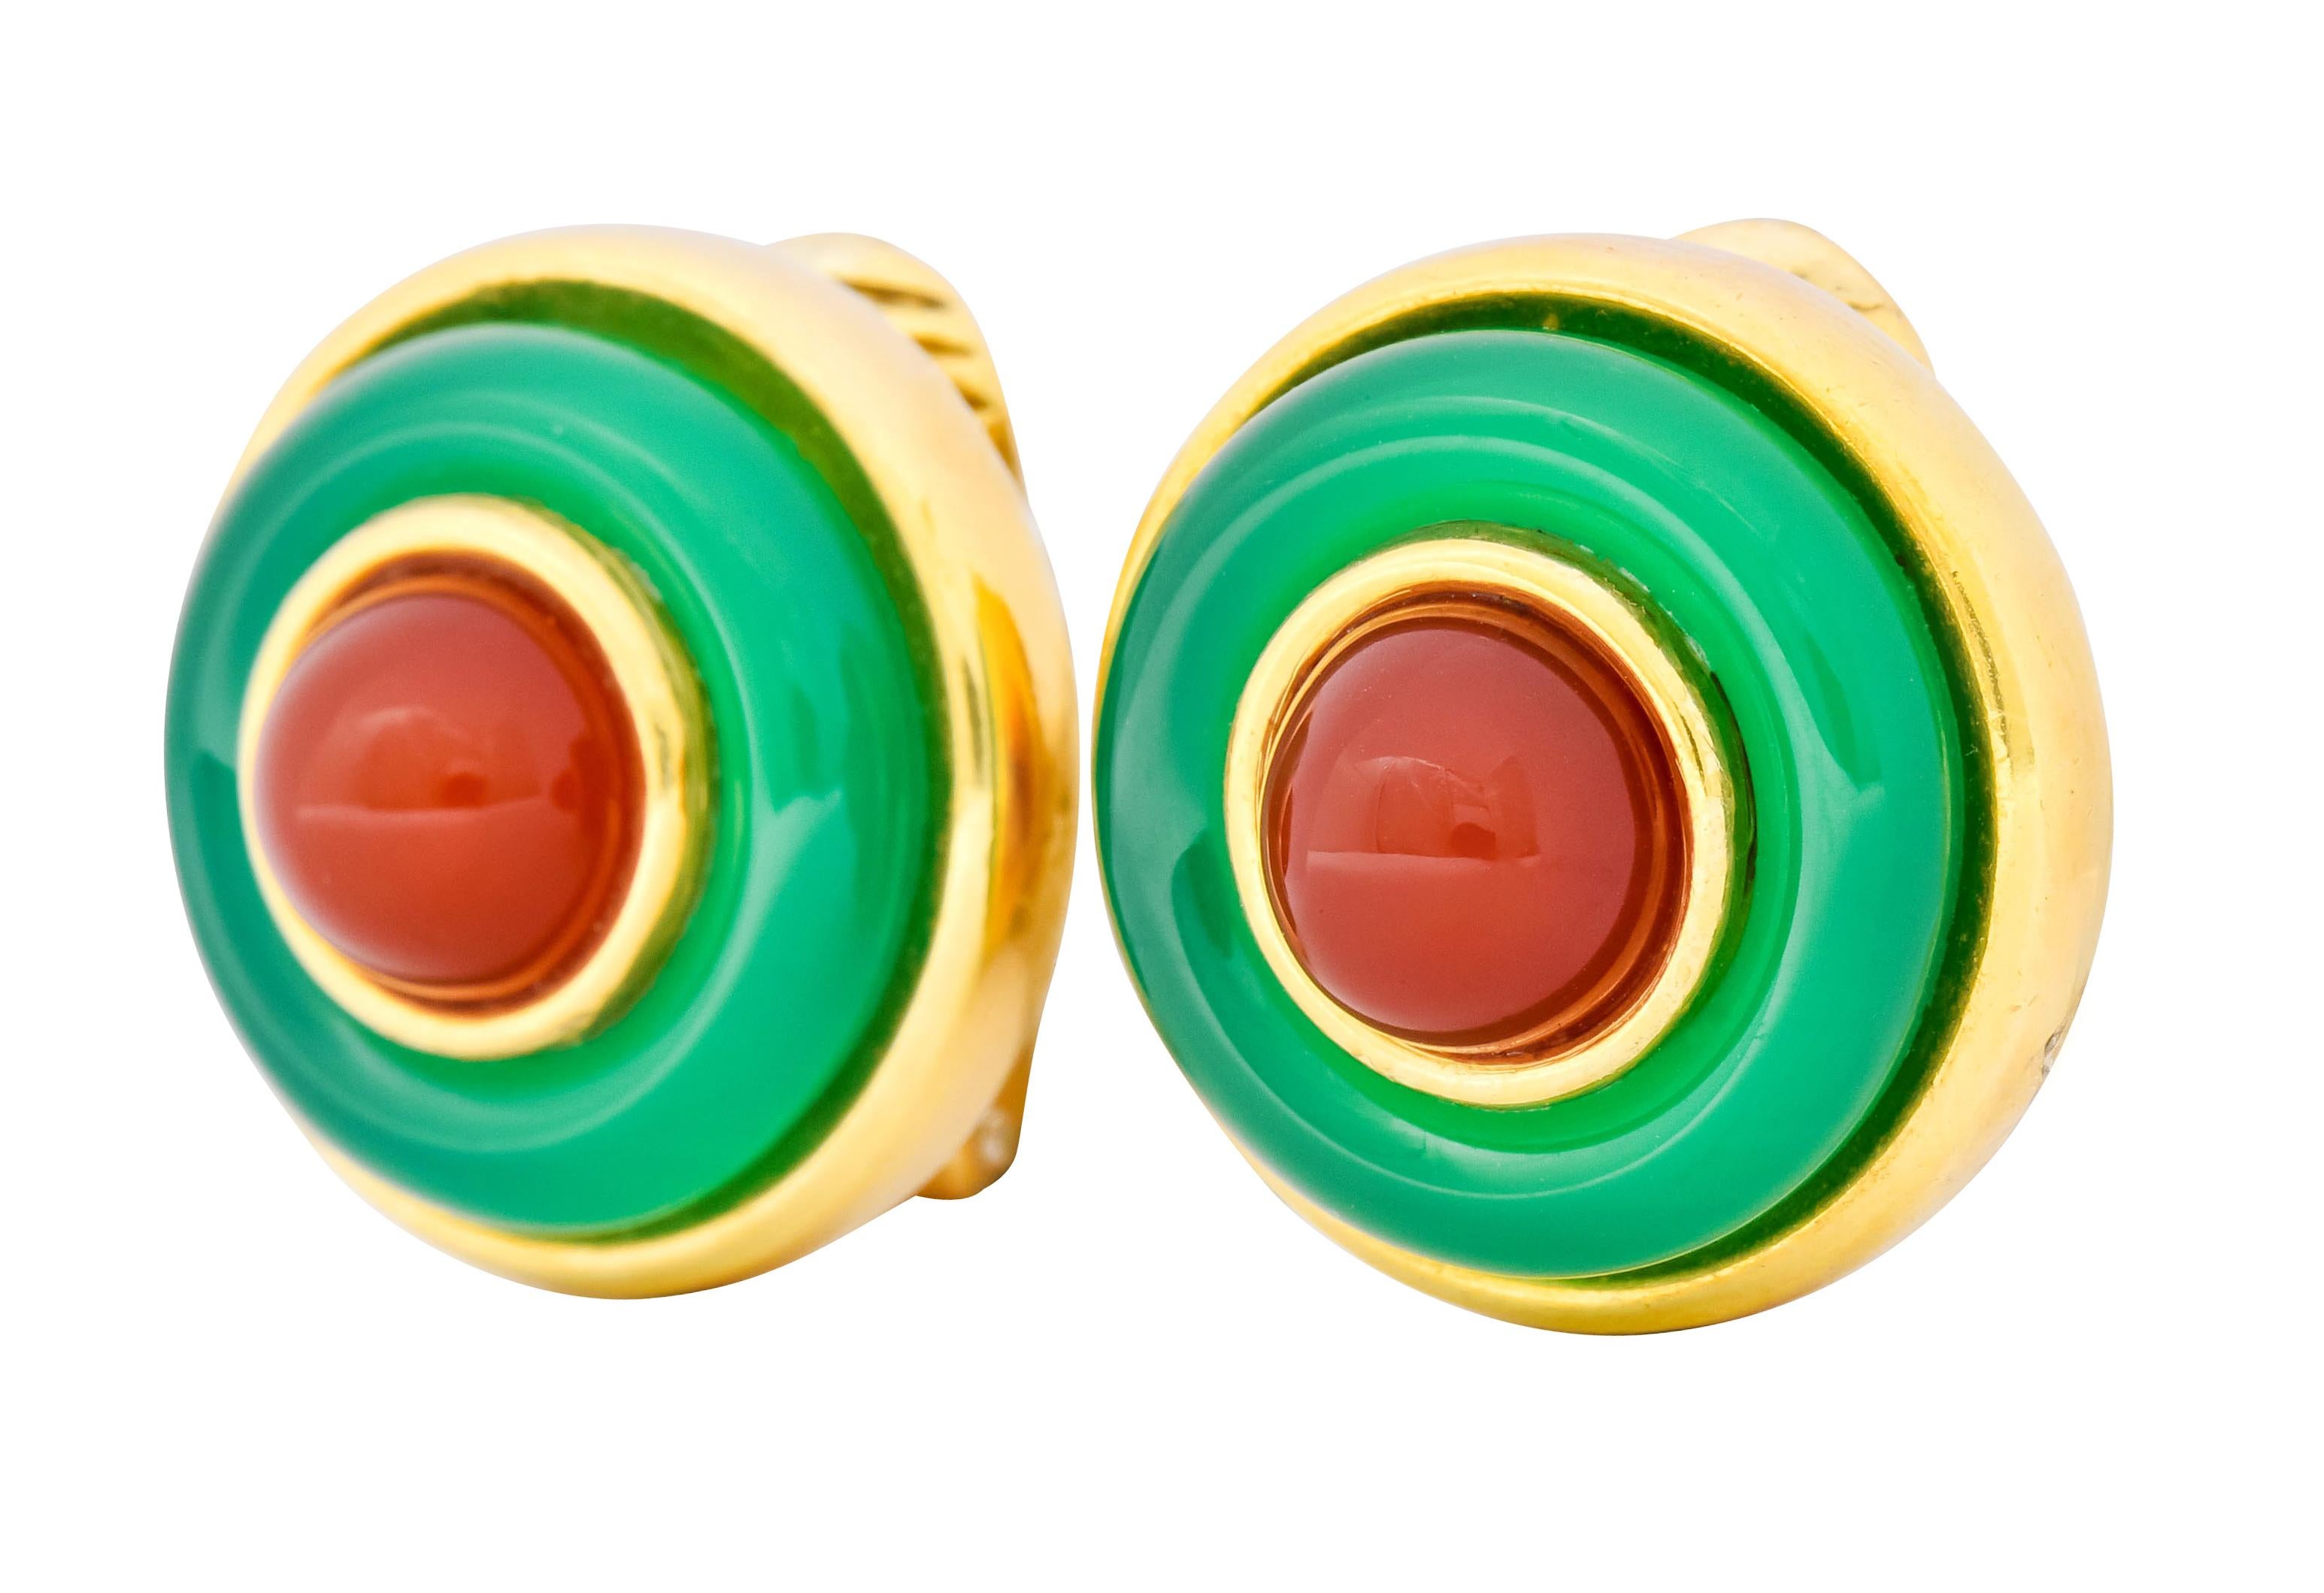 Each earring centers a round carnelian cabochon measuring approximately 7.5 mm, translucent and brick red in color

Surrounded by a carved ring of chrysoprase, translucent and a lush green in color

Both bezel set in a polished gold